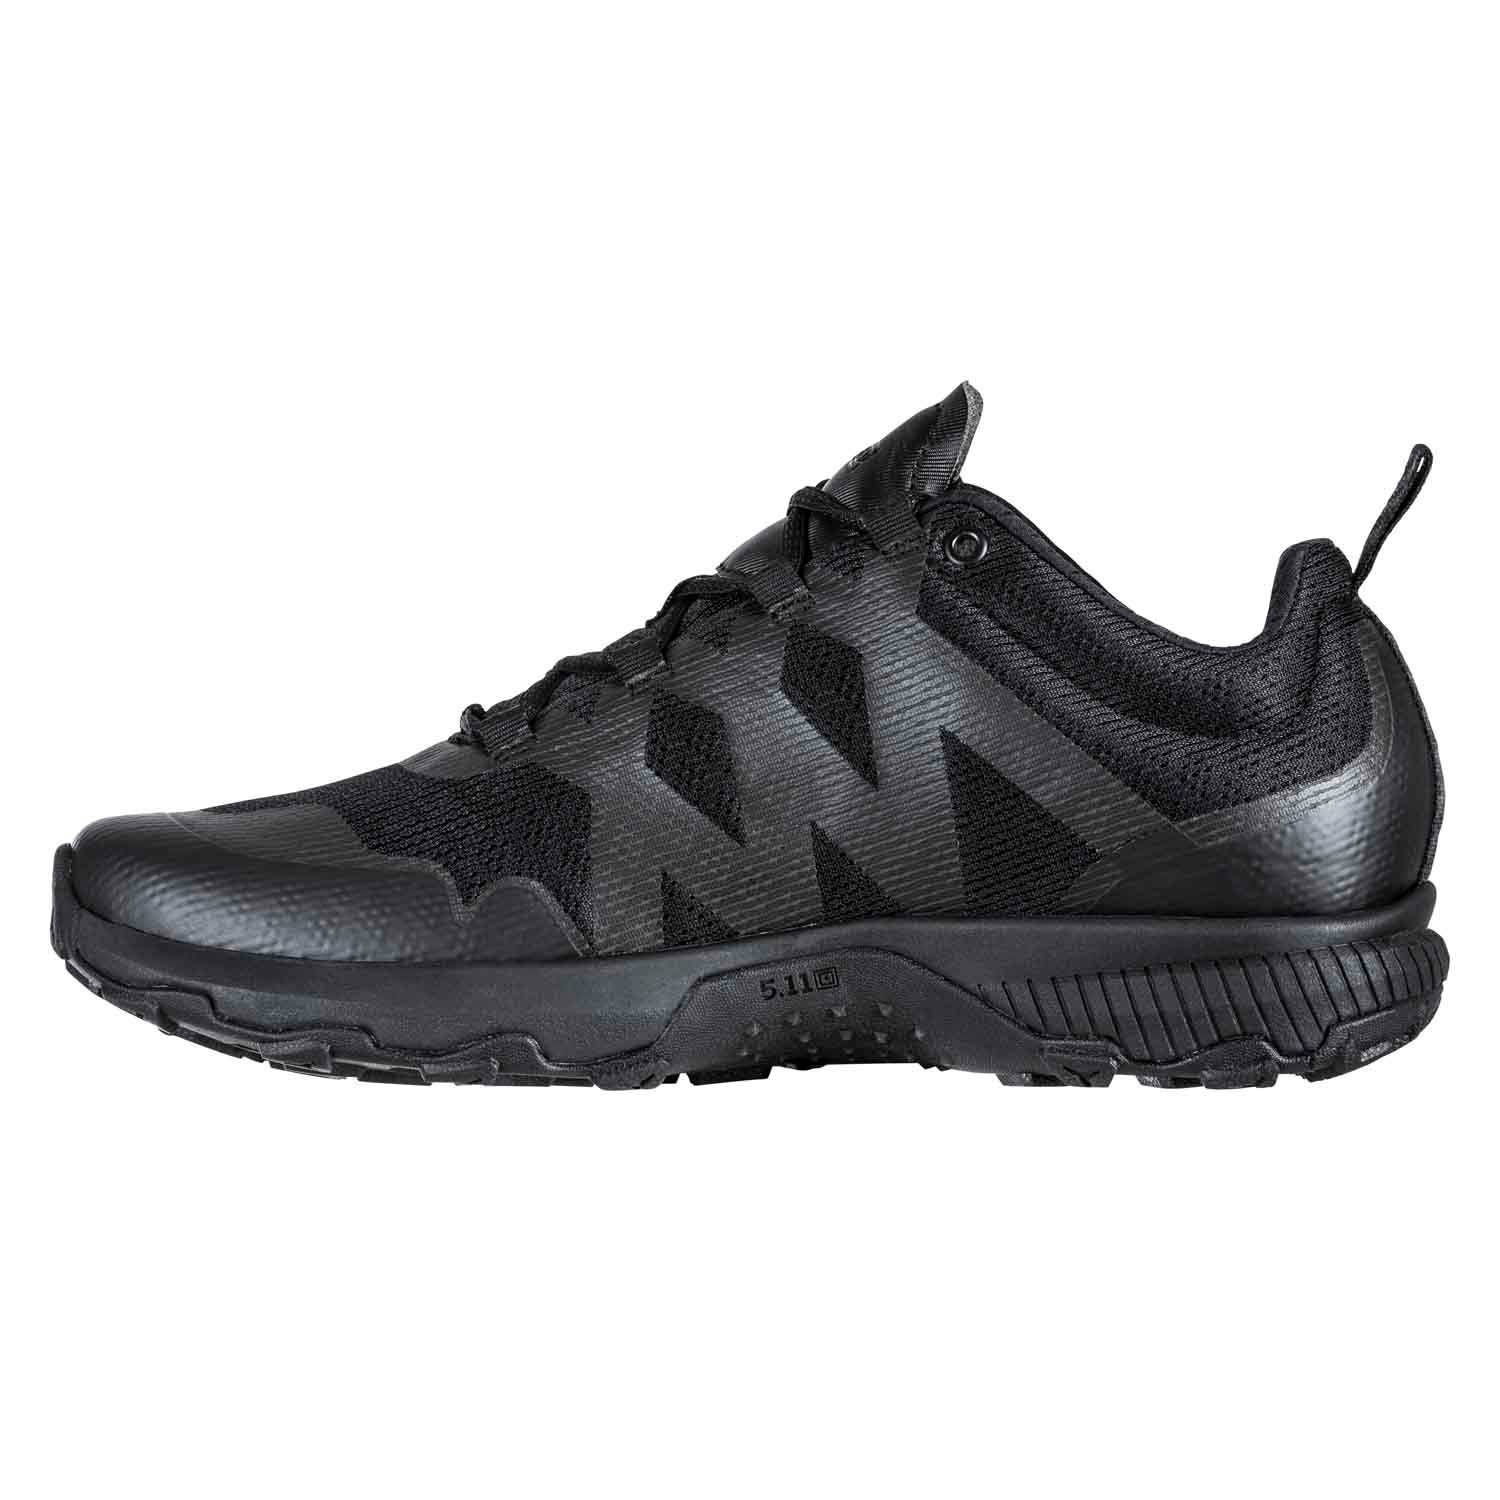 5.11 tactical trainer shoes